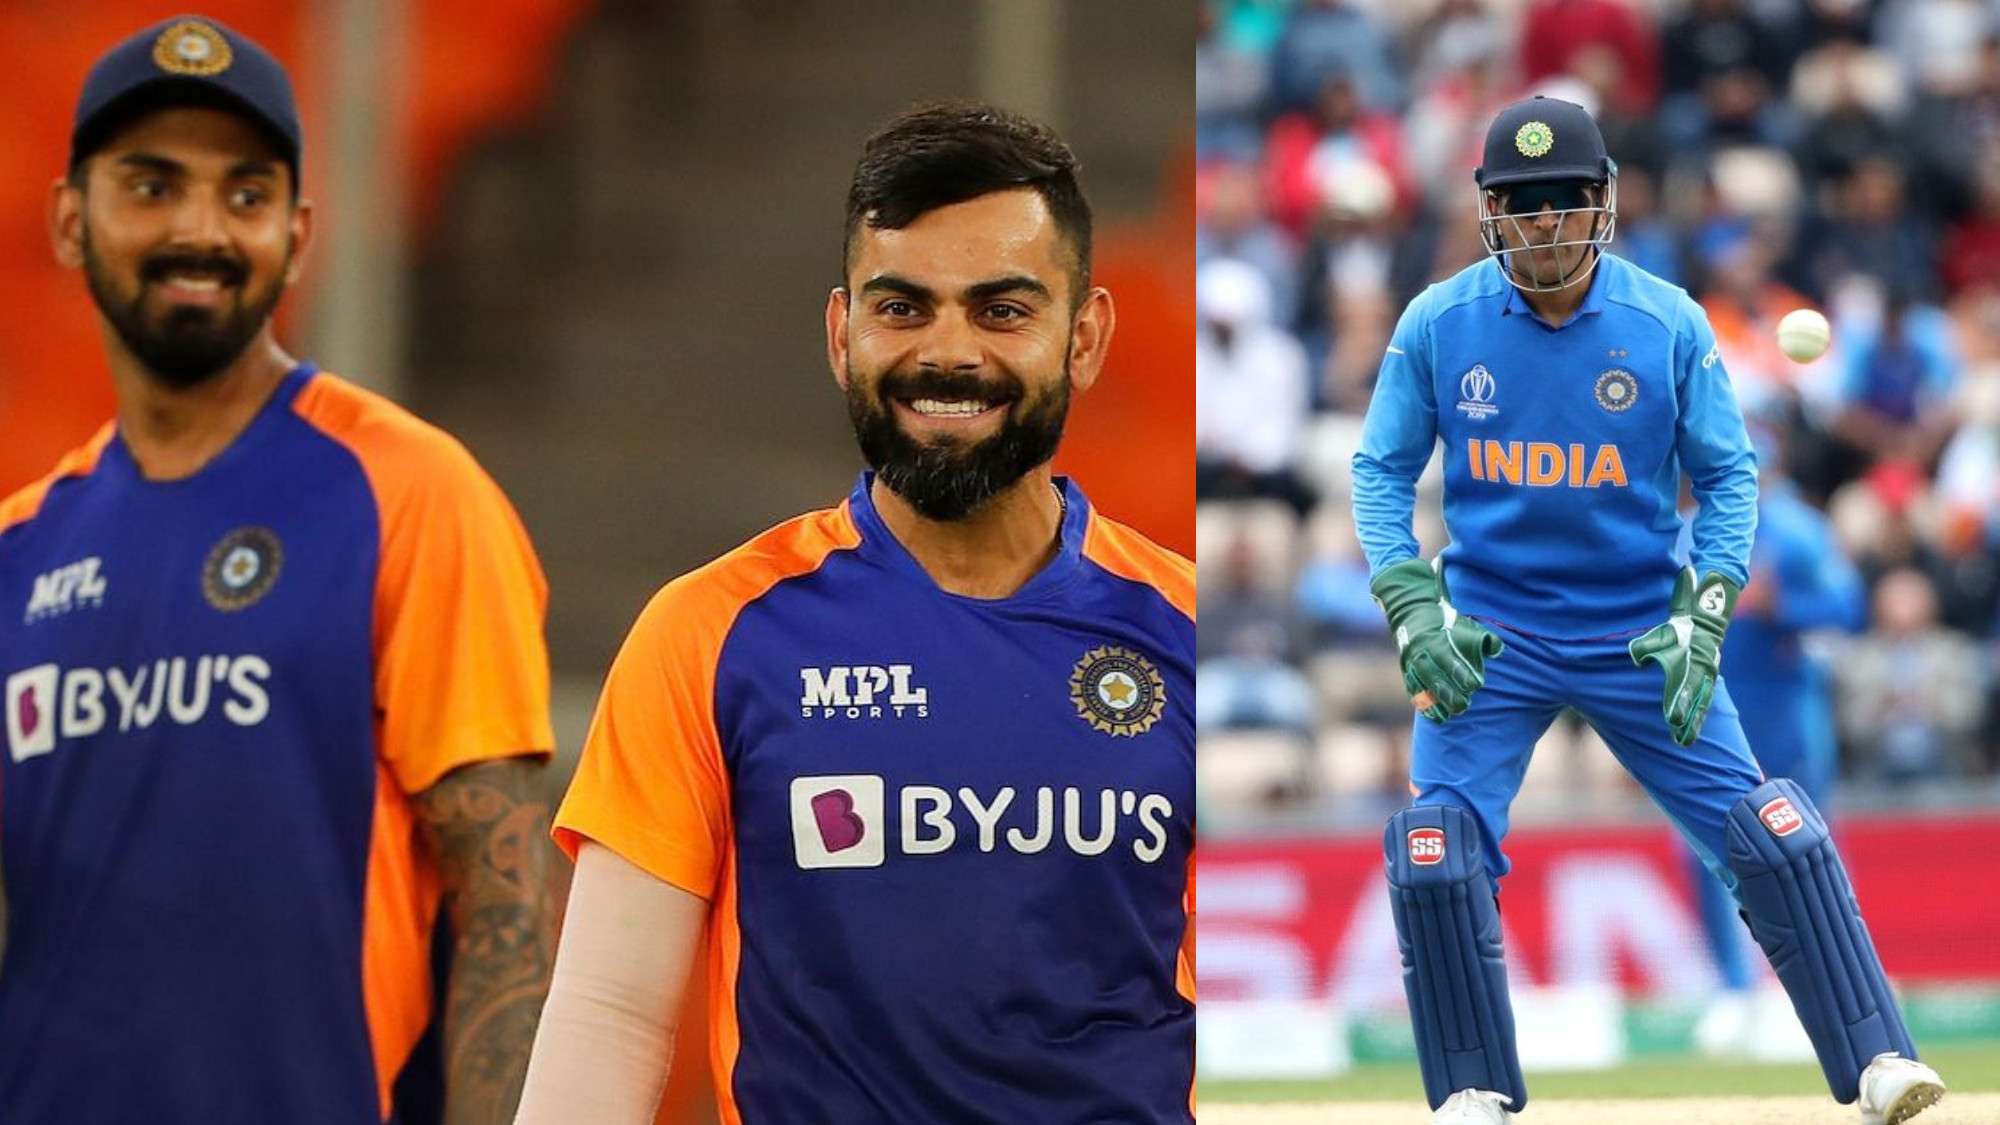 IND v ENG 2021: “Kohli should push Rahul down in playing XI, as Dhoni had done with him,” advises Chopra